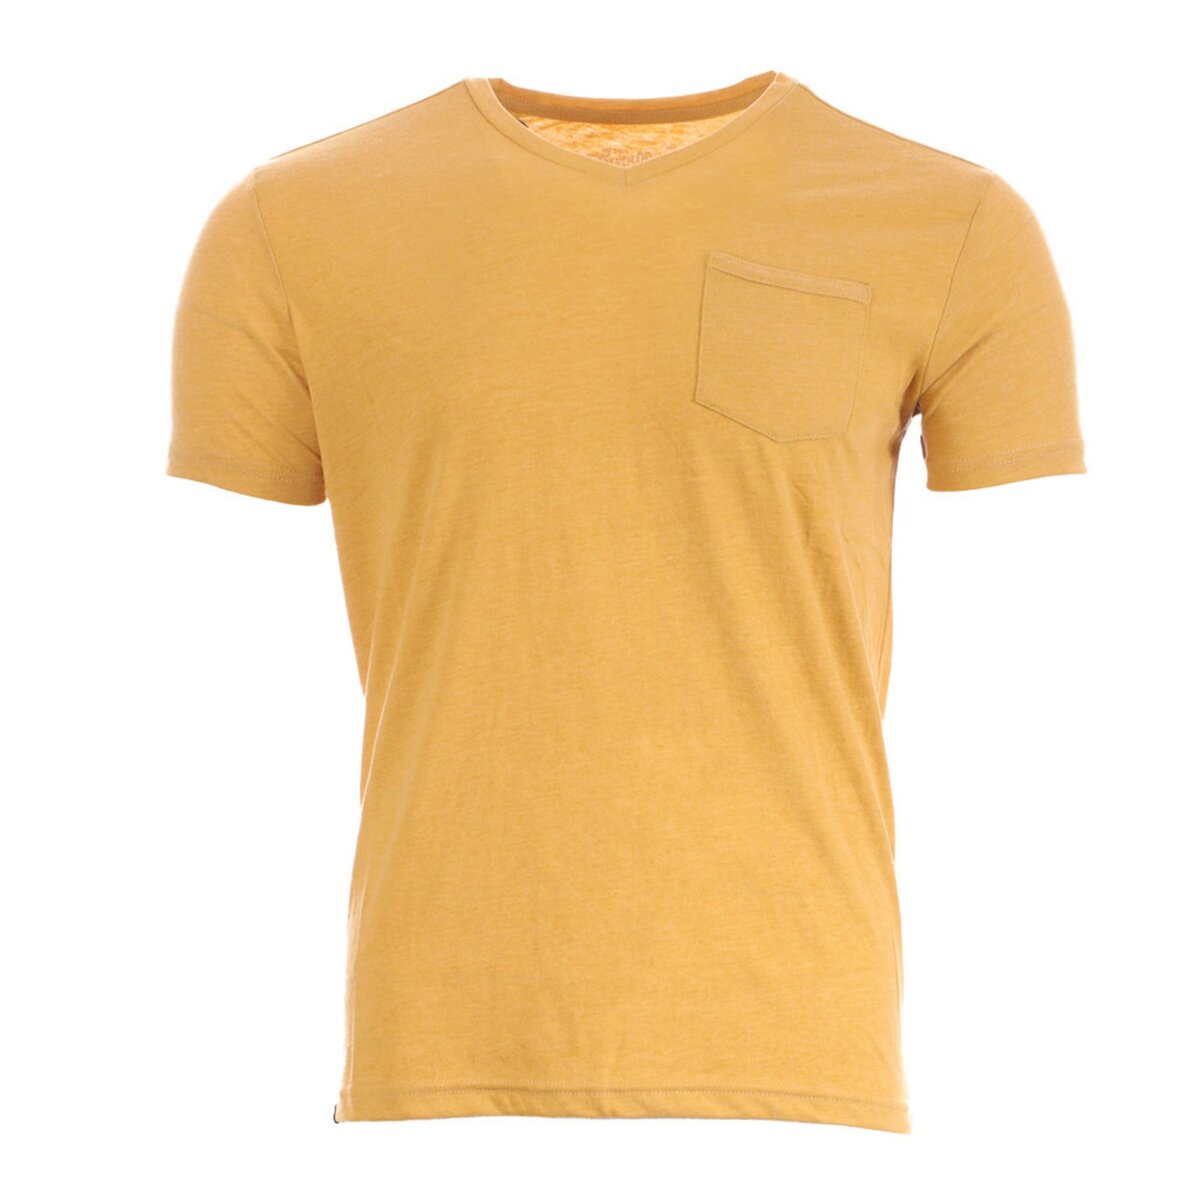 RMS 26 T-shirt Jaune Homme RMS26 90941